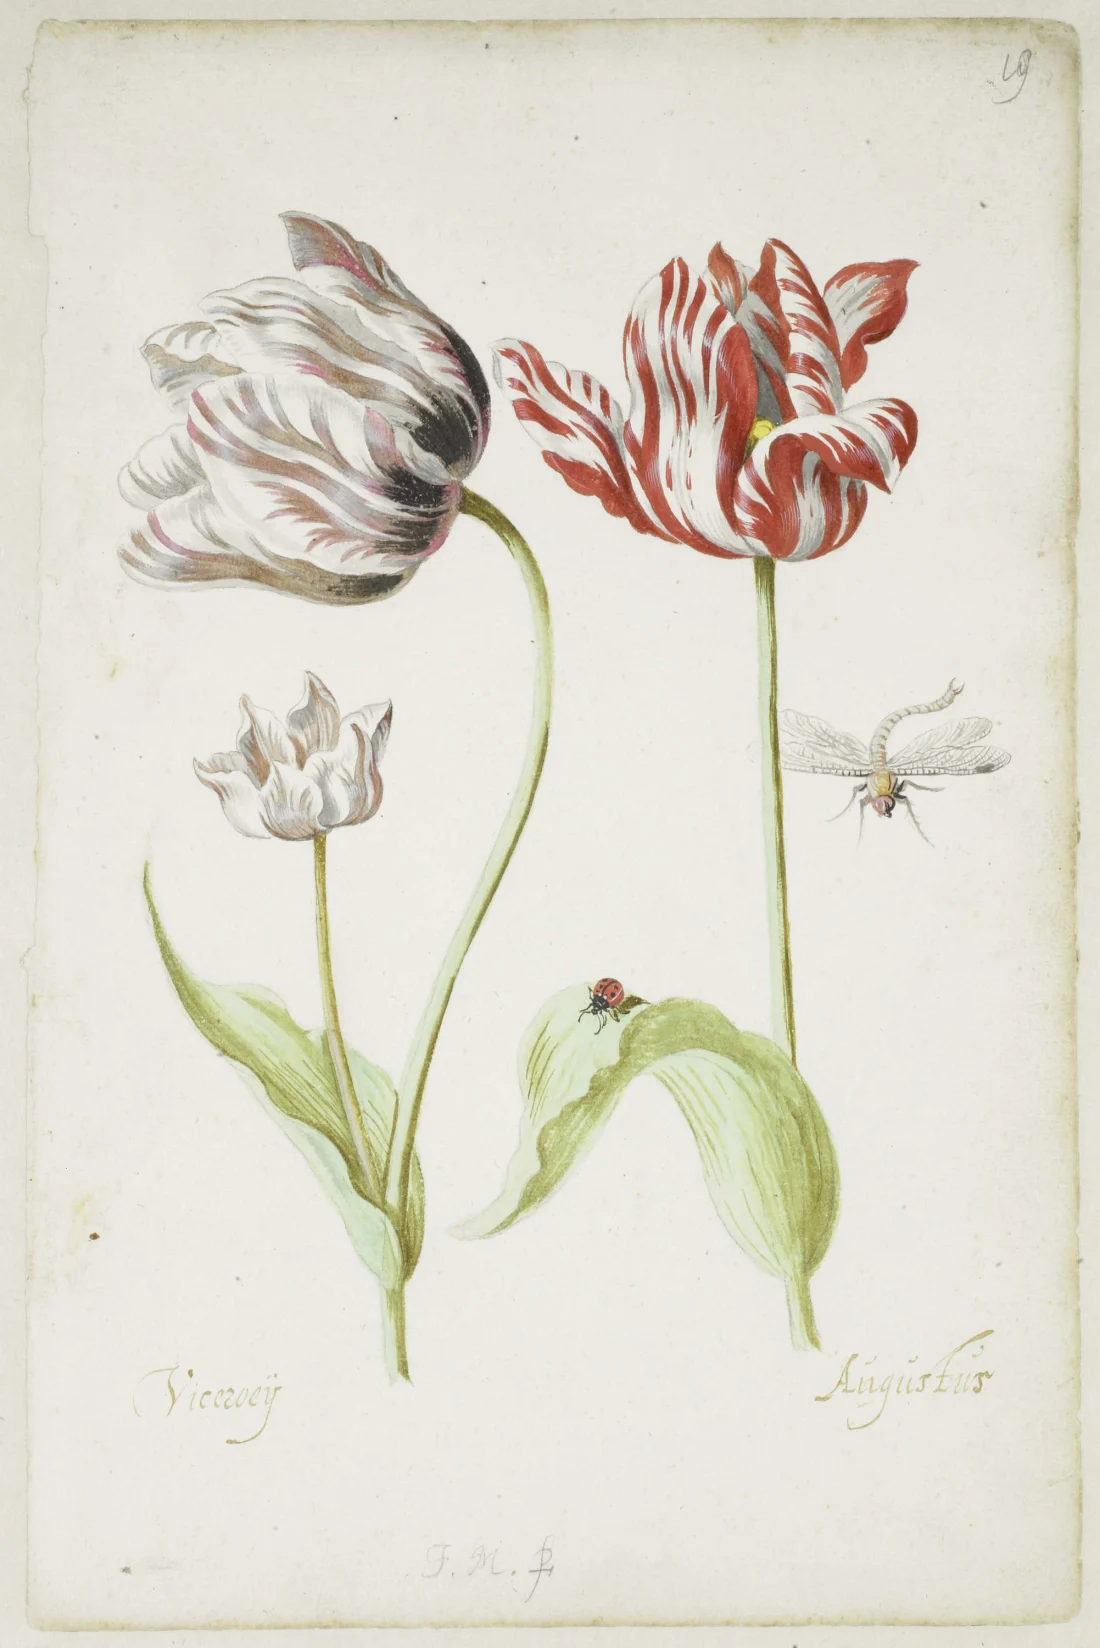 colour illustration of two tulips with insects